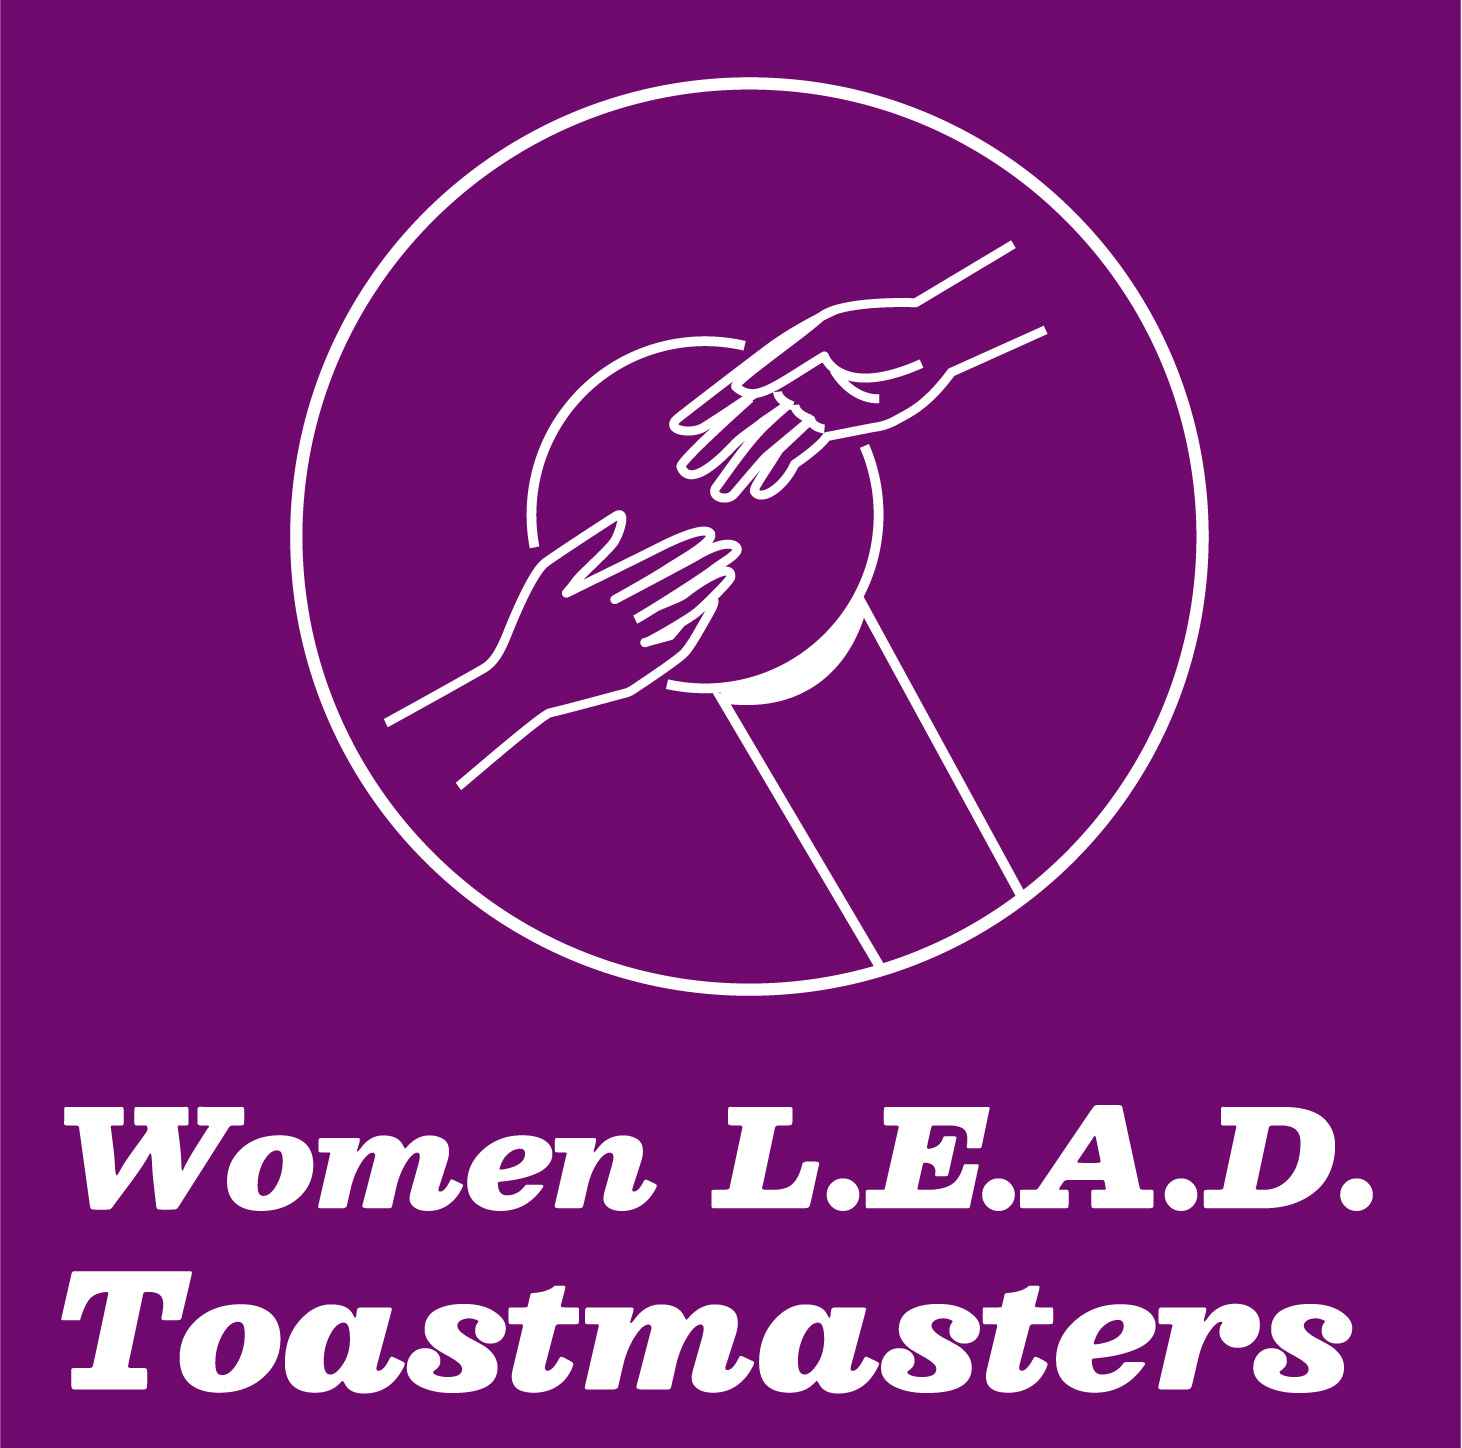 Women L.E.A.D. Toastmasters